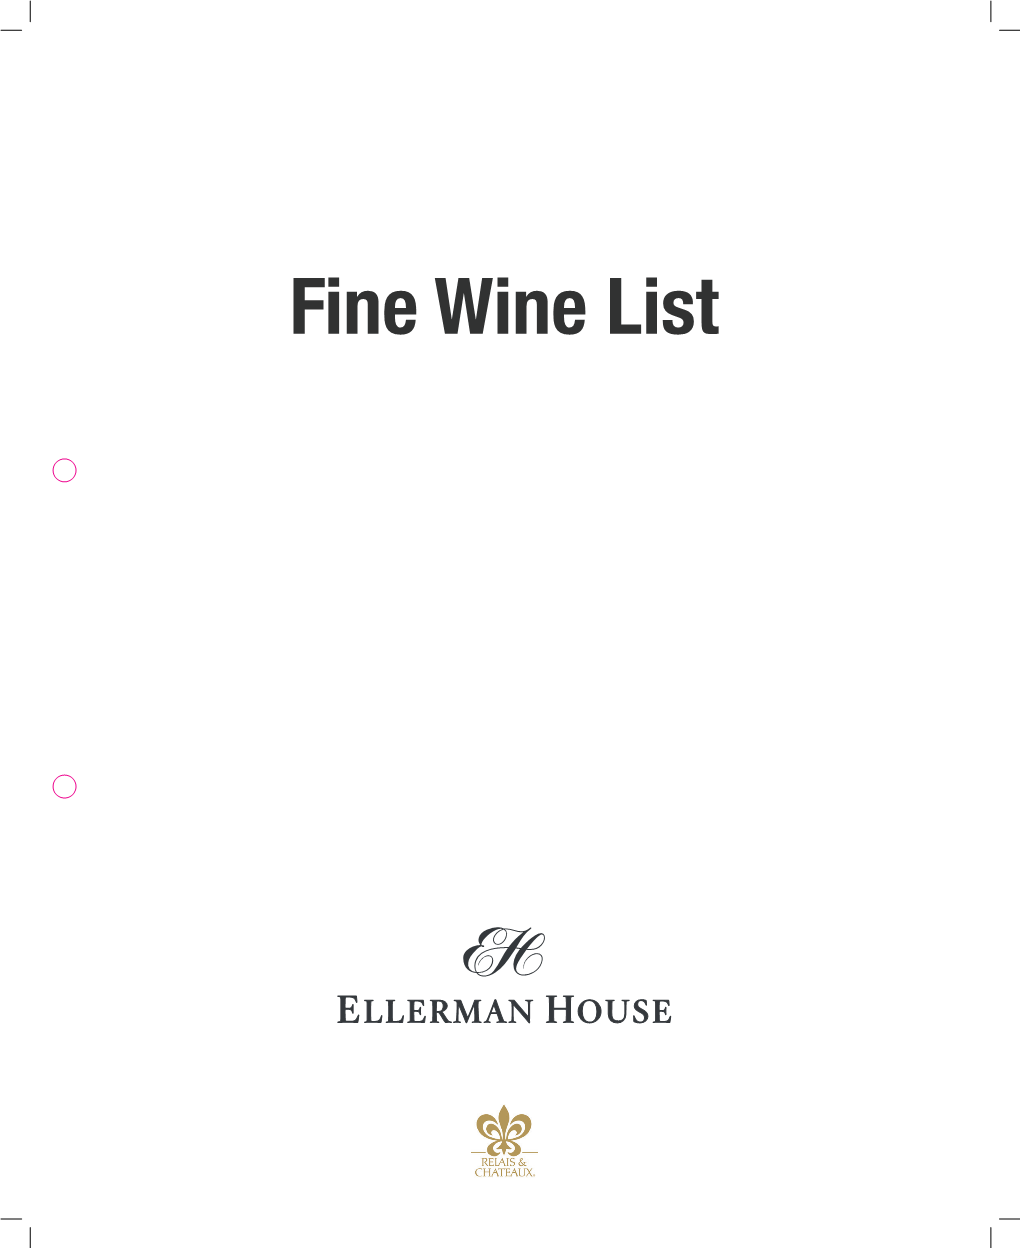 EH Wine List 2018.Indd